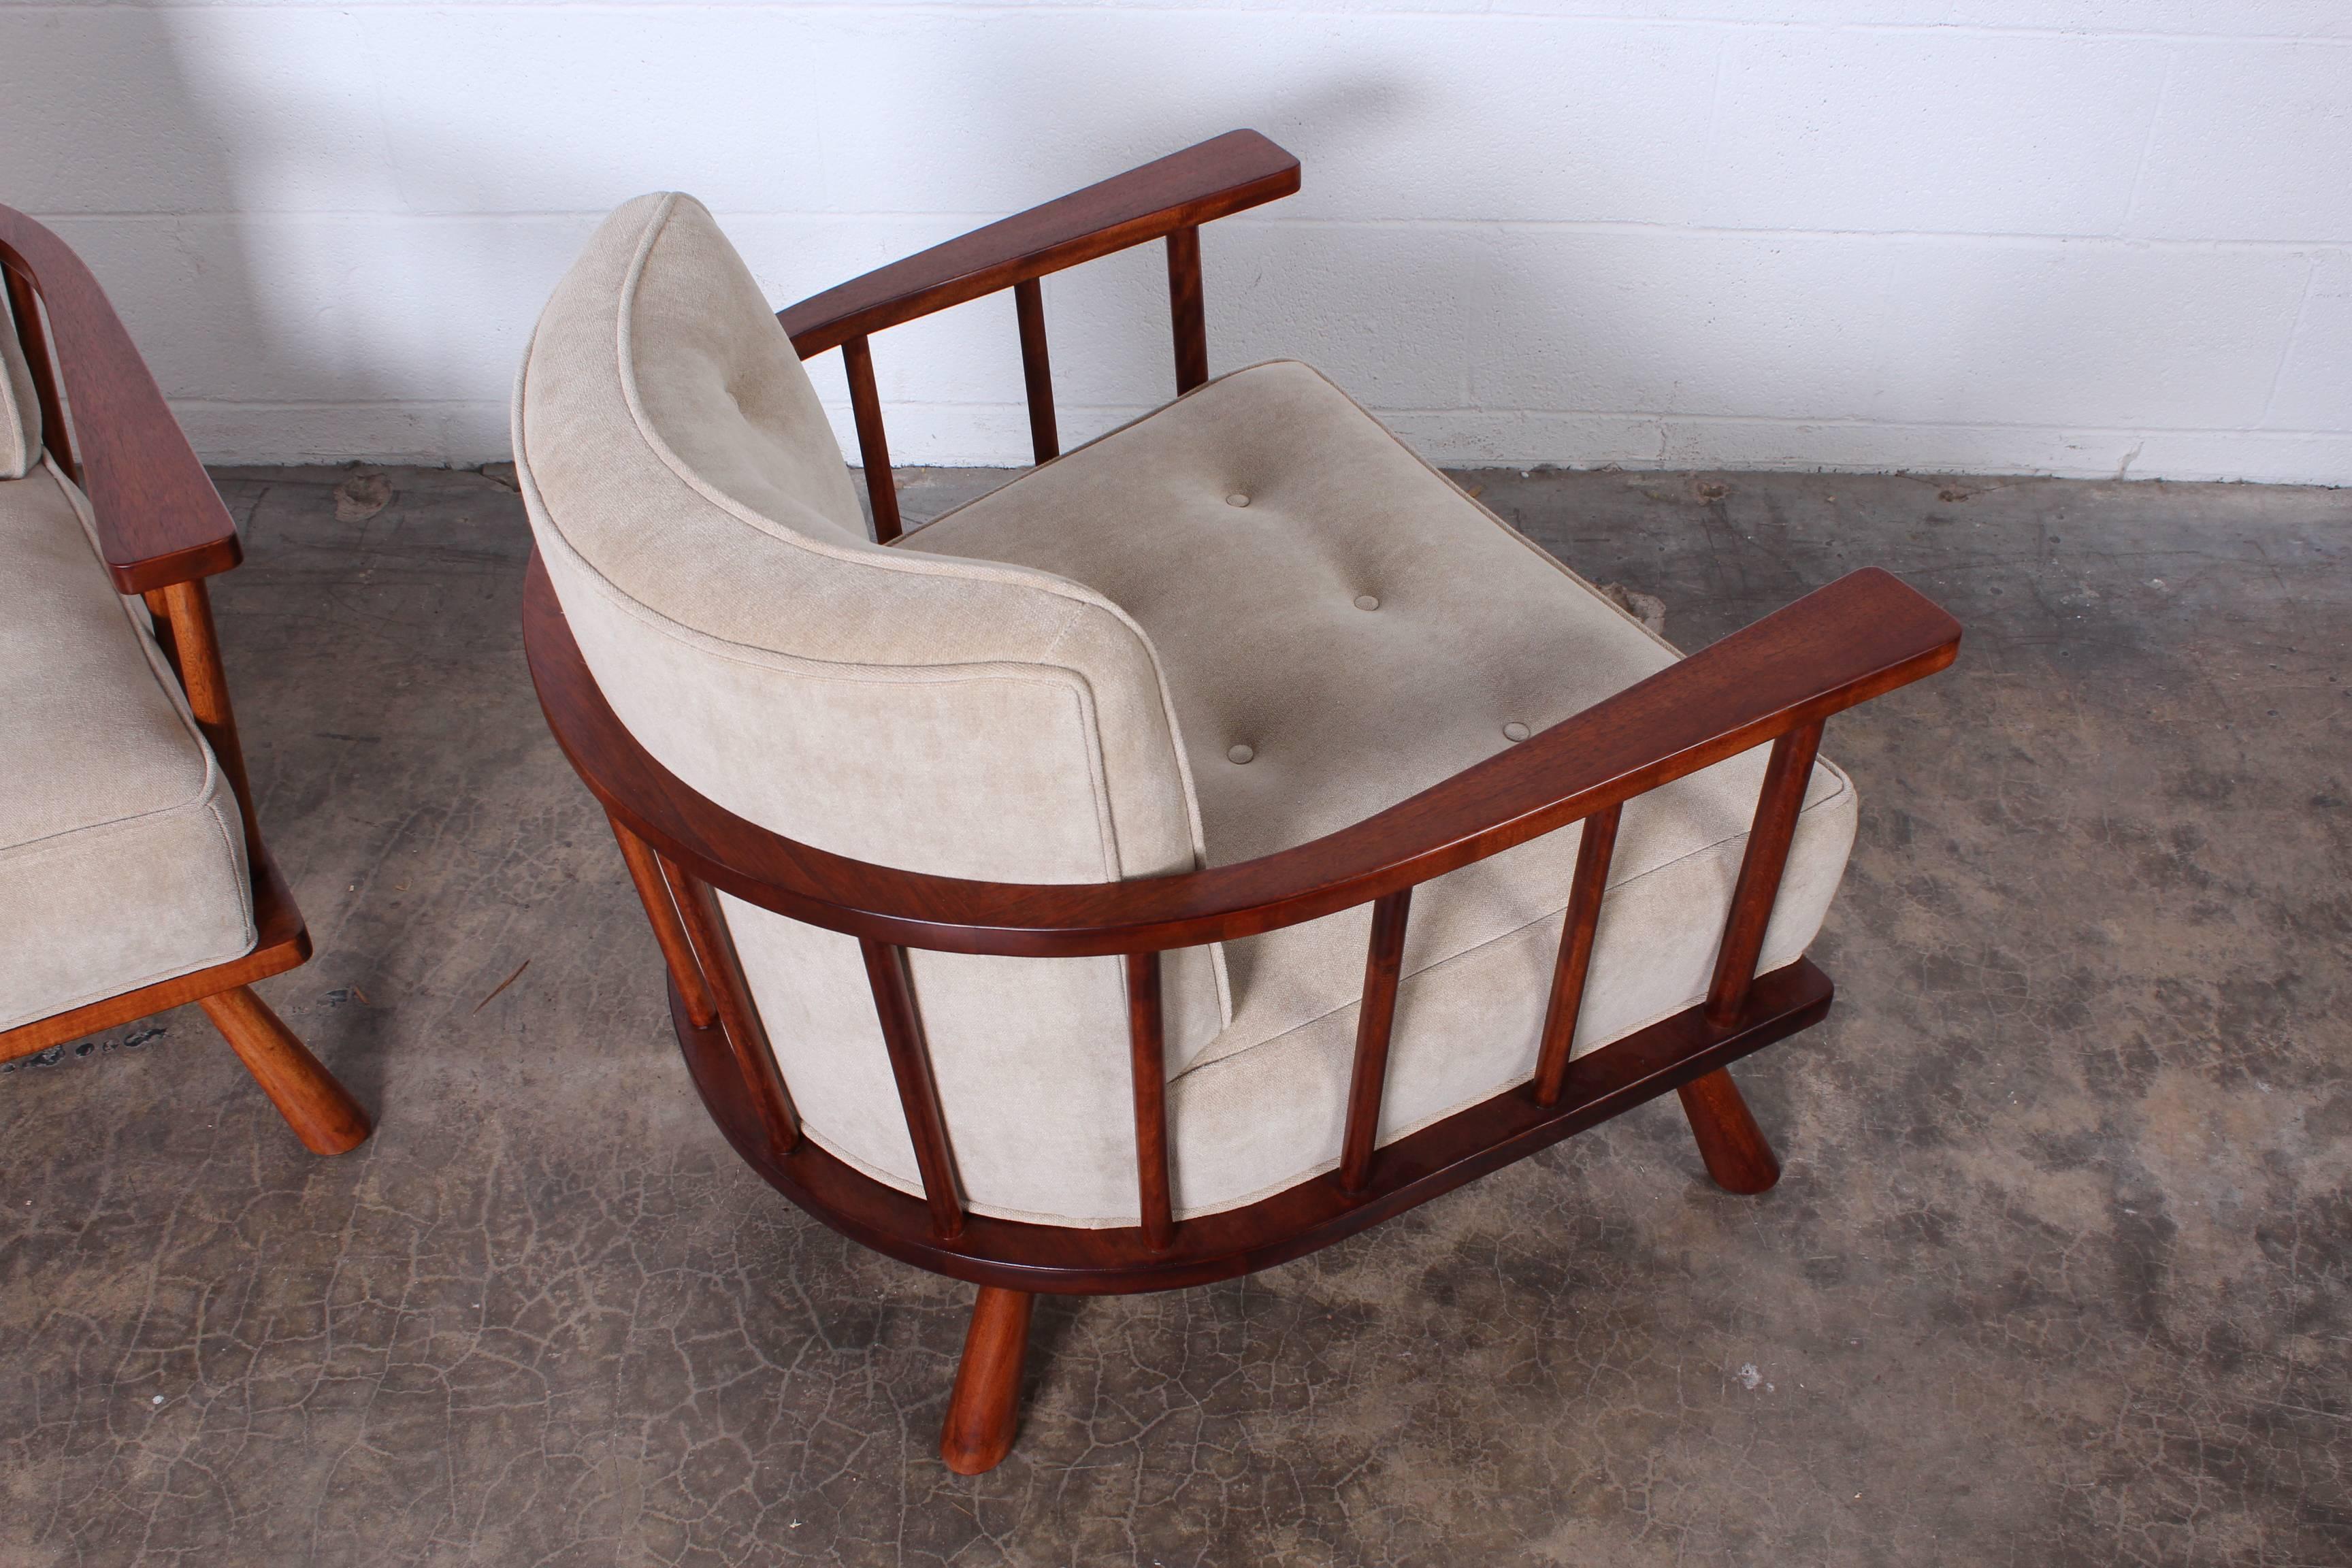 Mid-20th Century Pair of Lounge Chairs by T.H. Robsjohn-Gibbings